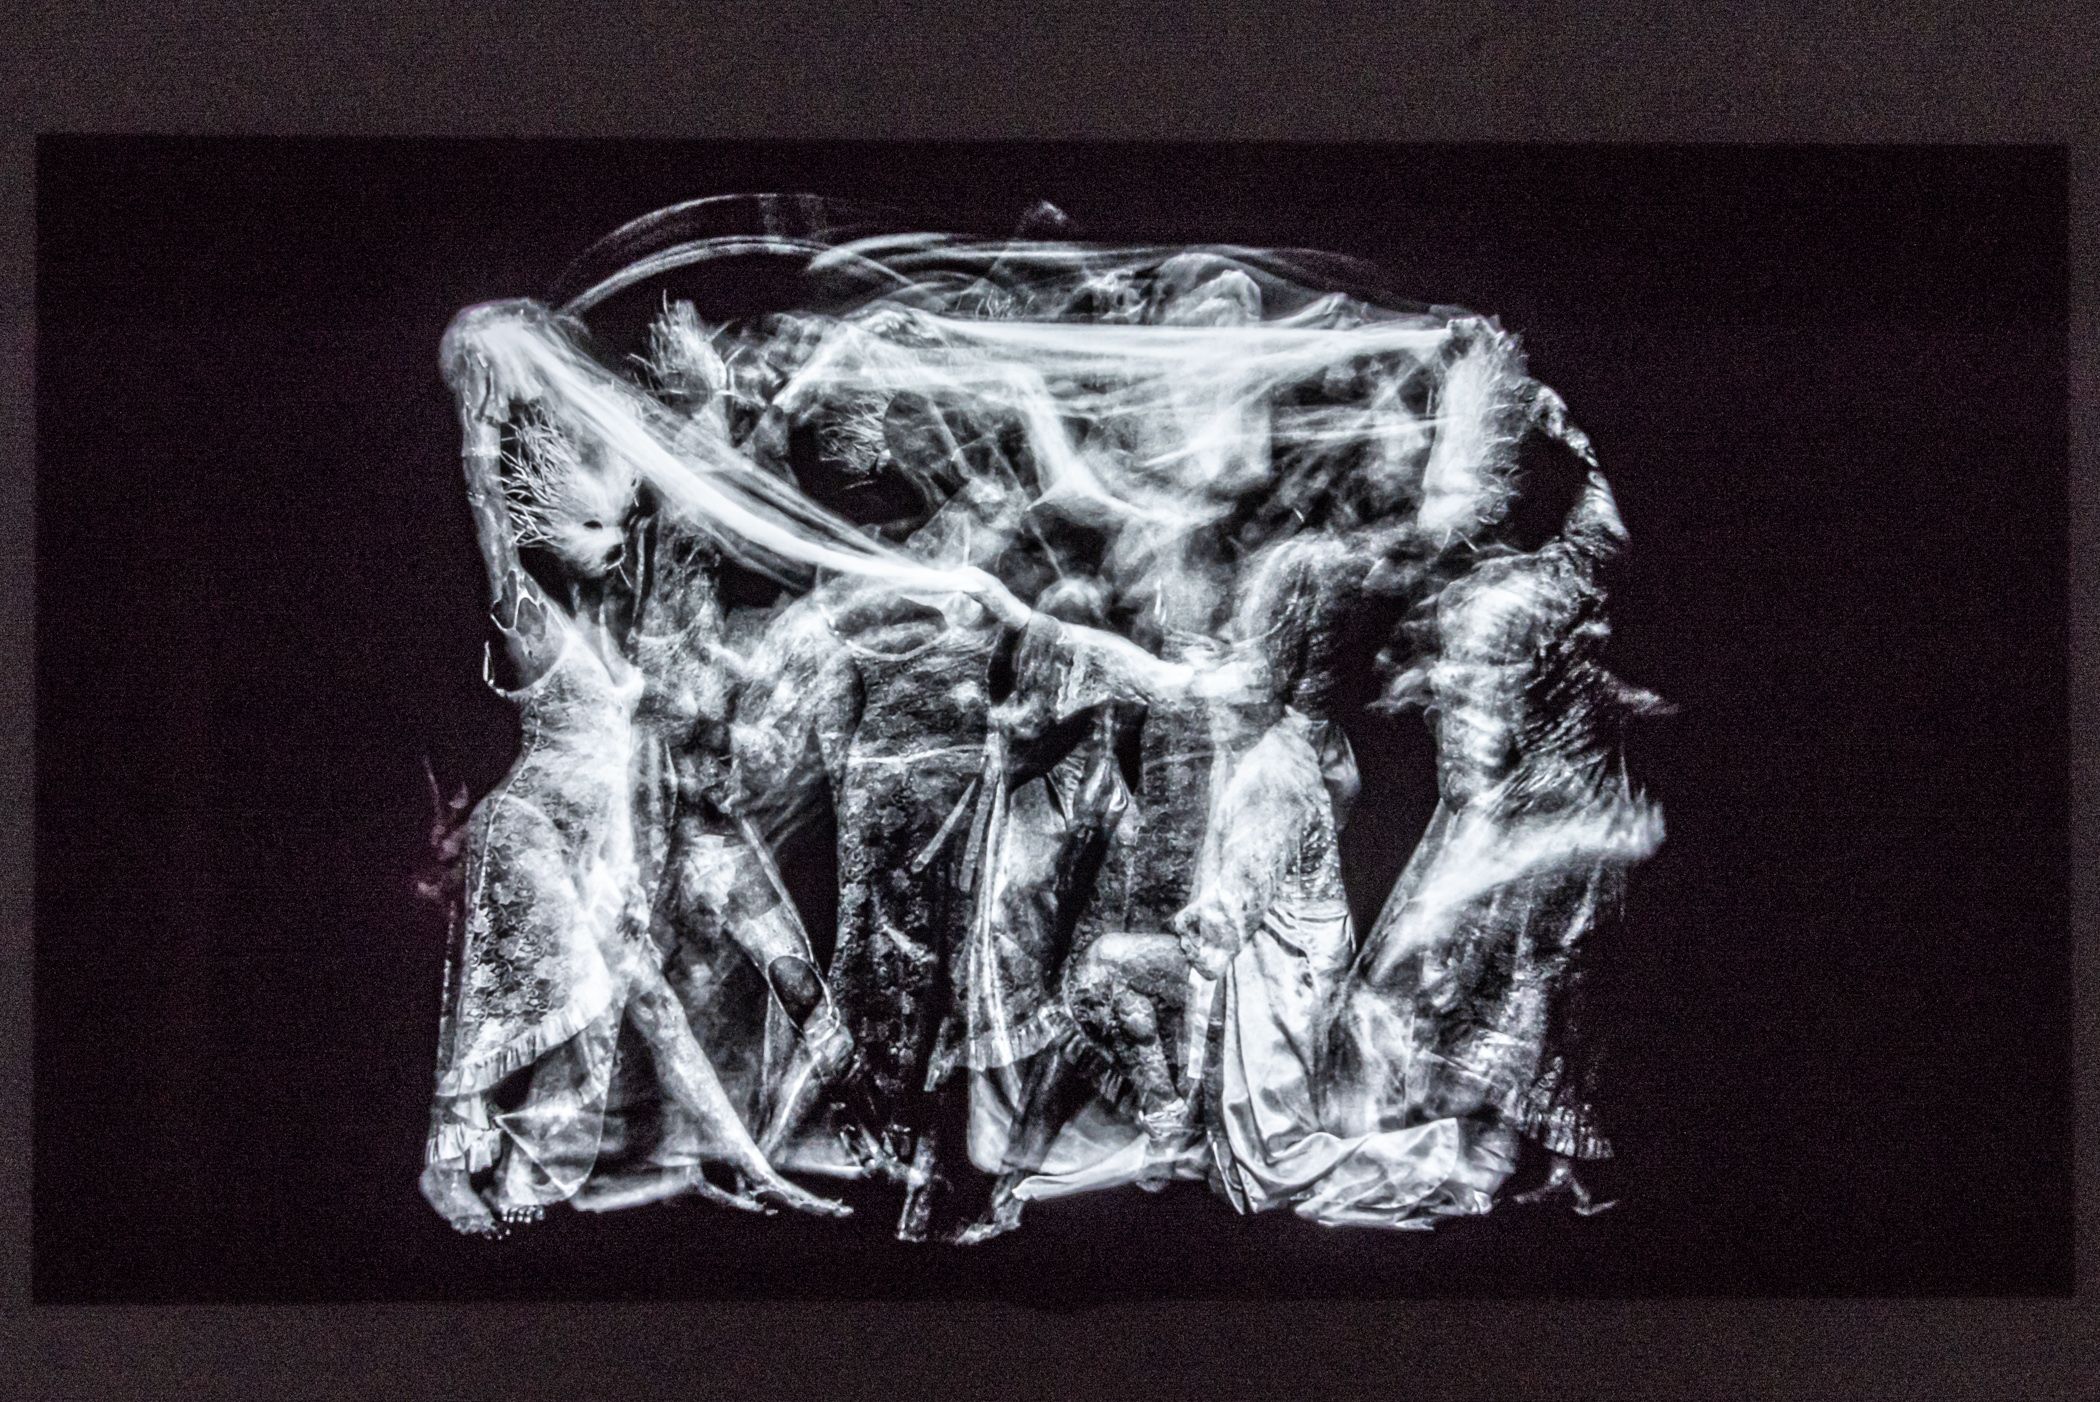 Dryads,	single-panel OLED installation, photographic imagery on 5:00 video loop